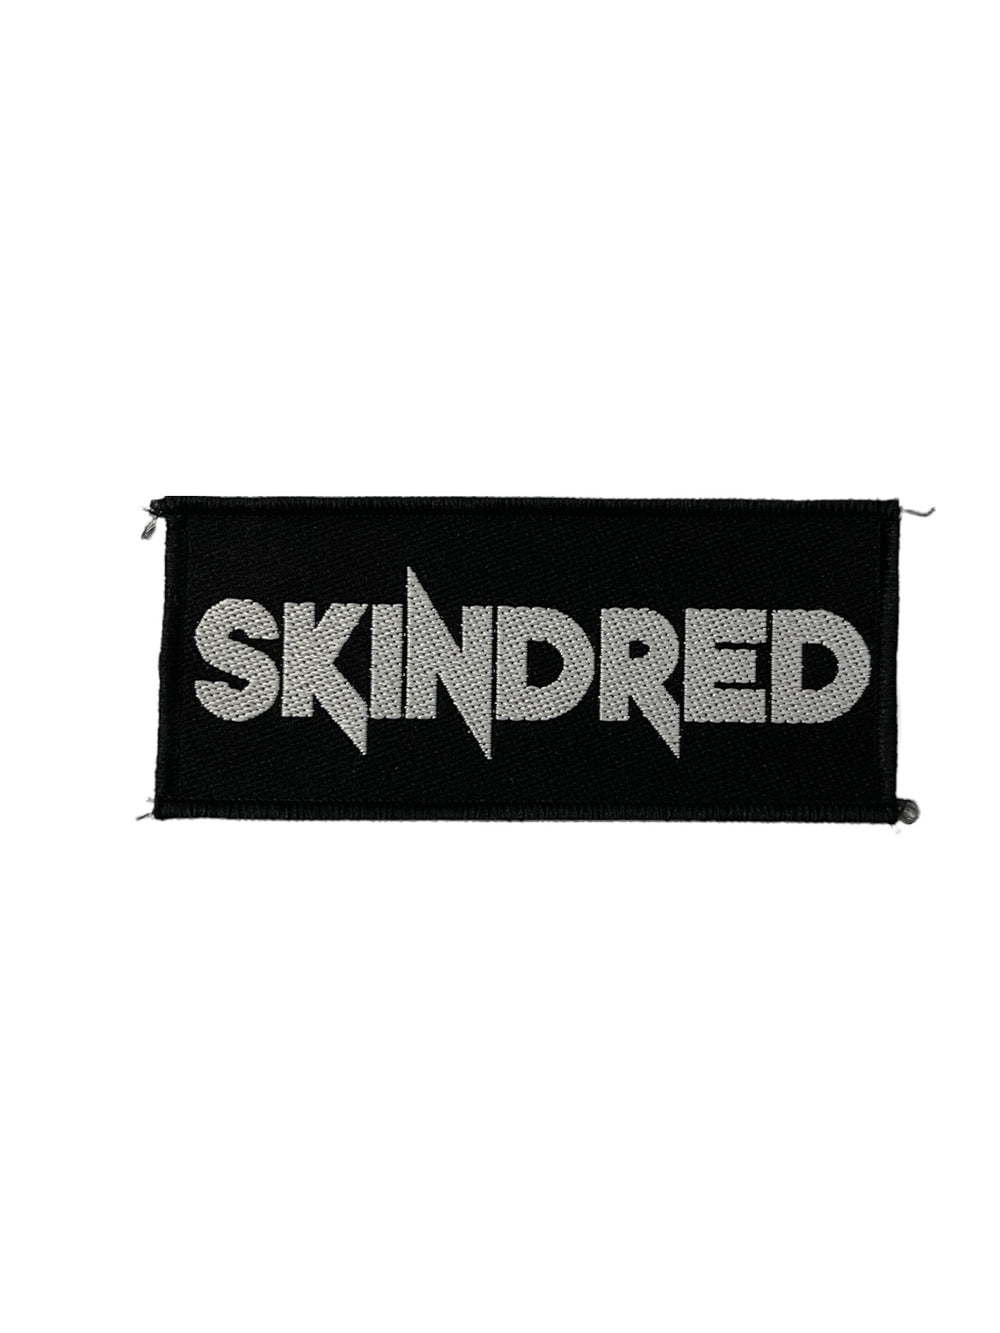 Skindred Logo Name Standard Patch: Pinhead Official Woven Patch Brand New